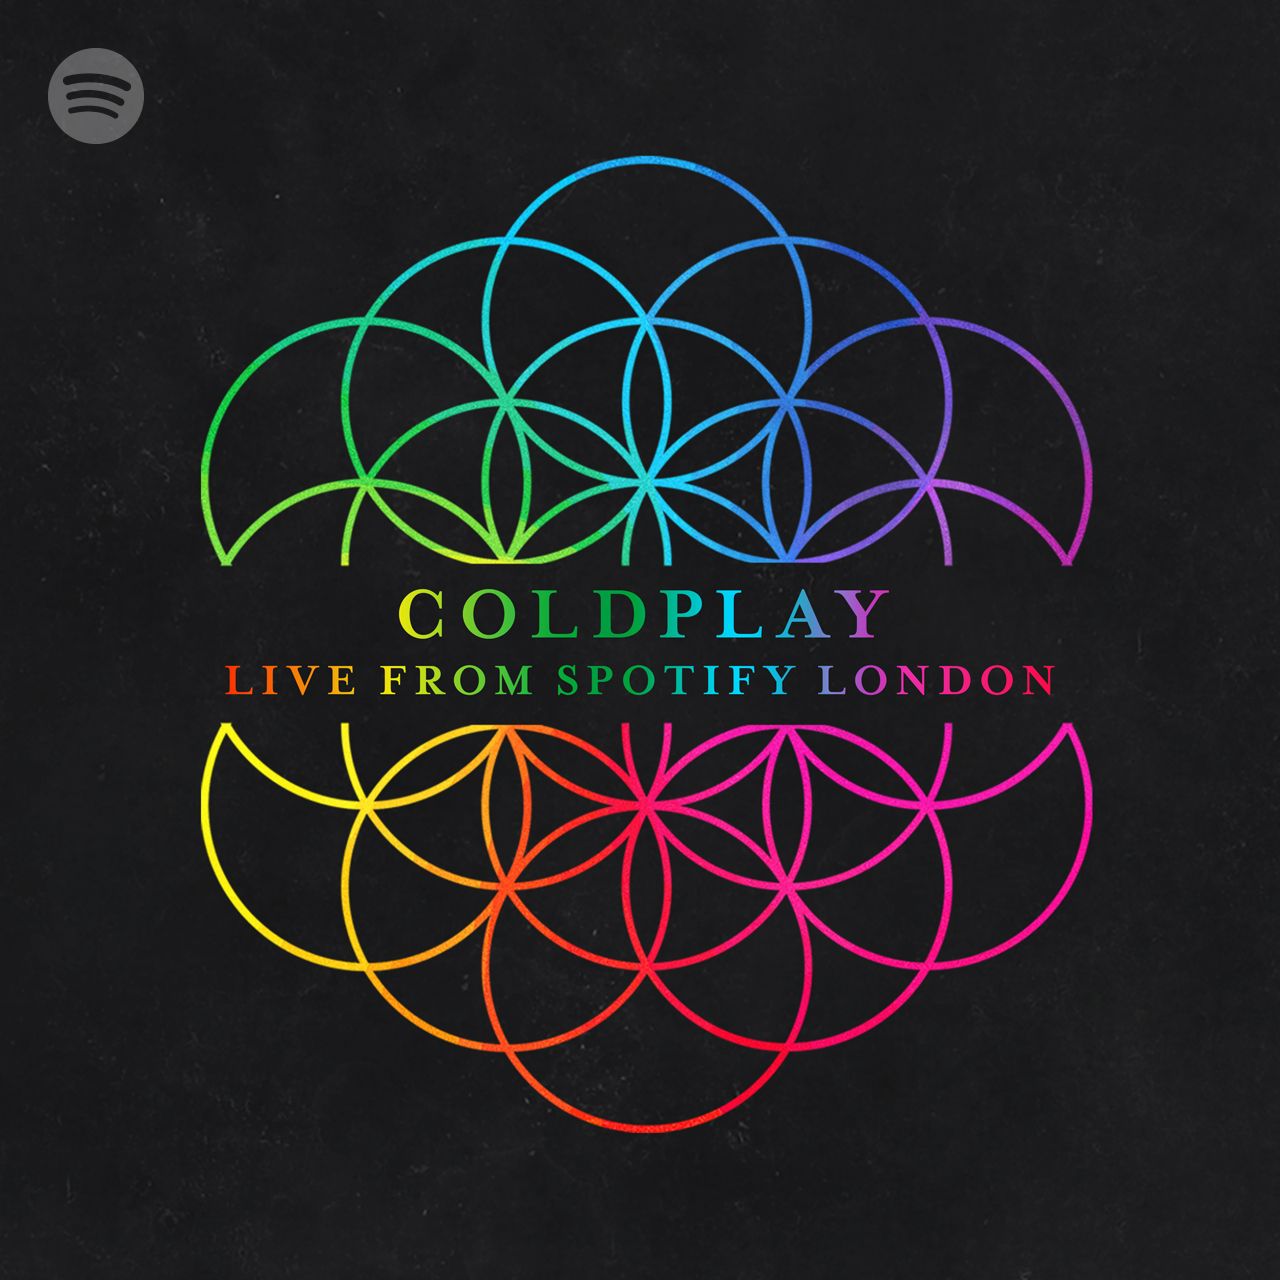 Coldplay – Live From Spotify London out now!